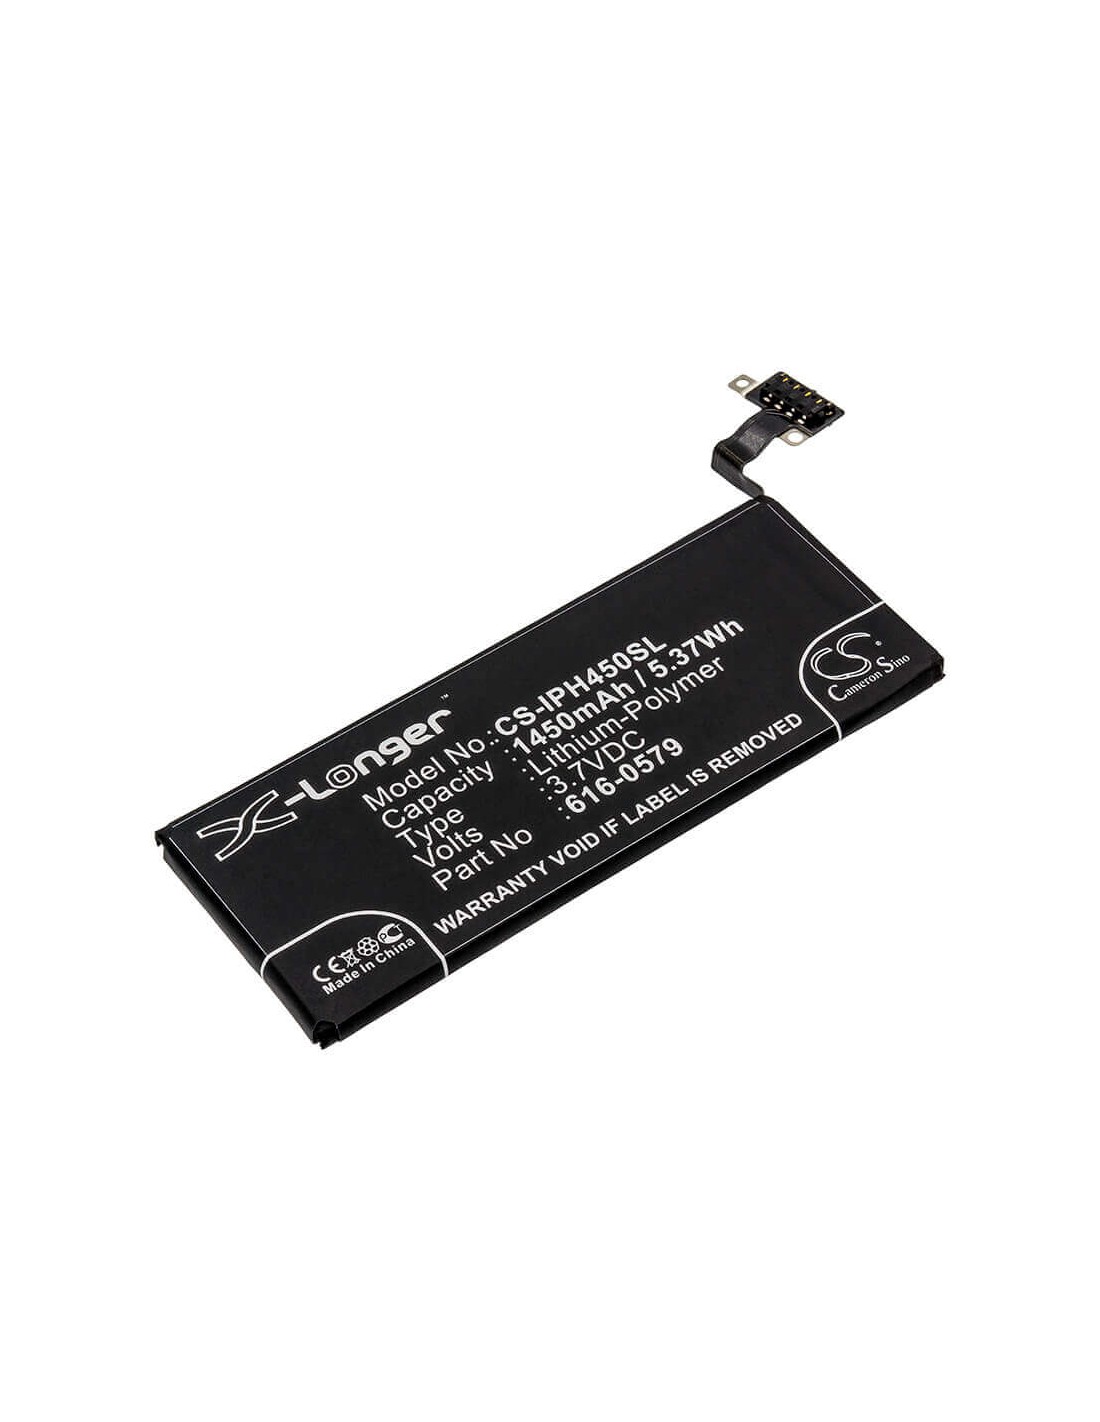 Battery for Apple iPhone 4S, iPhone 4S 16GB, iPhone 4S 32GB 3.7V, 1450mAh - 5.37Wh